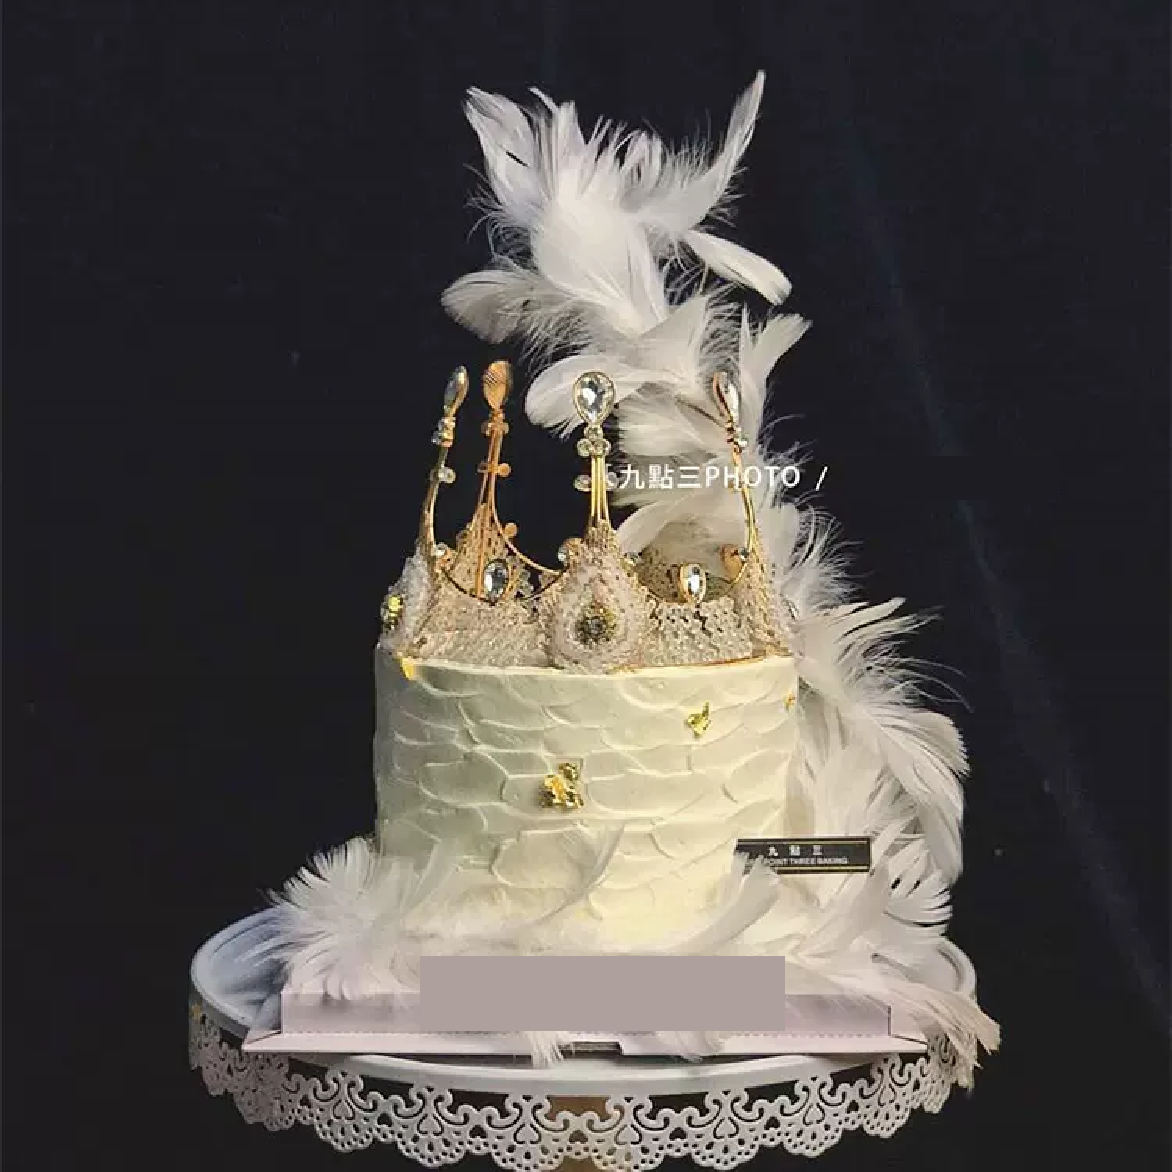 Cake Topper Cake Decorations - Tiara 'Vintage Gold Crystal Crown - Rampant Coffee Company